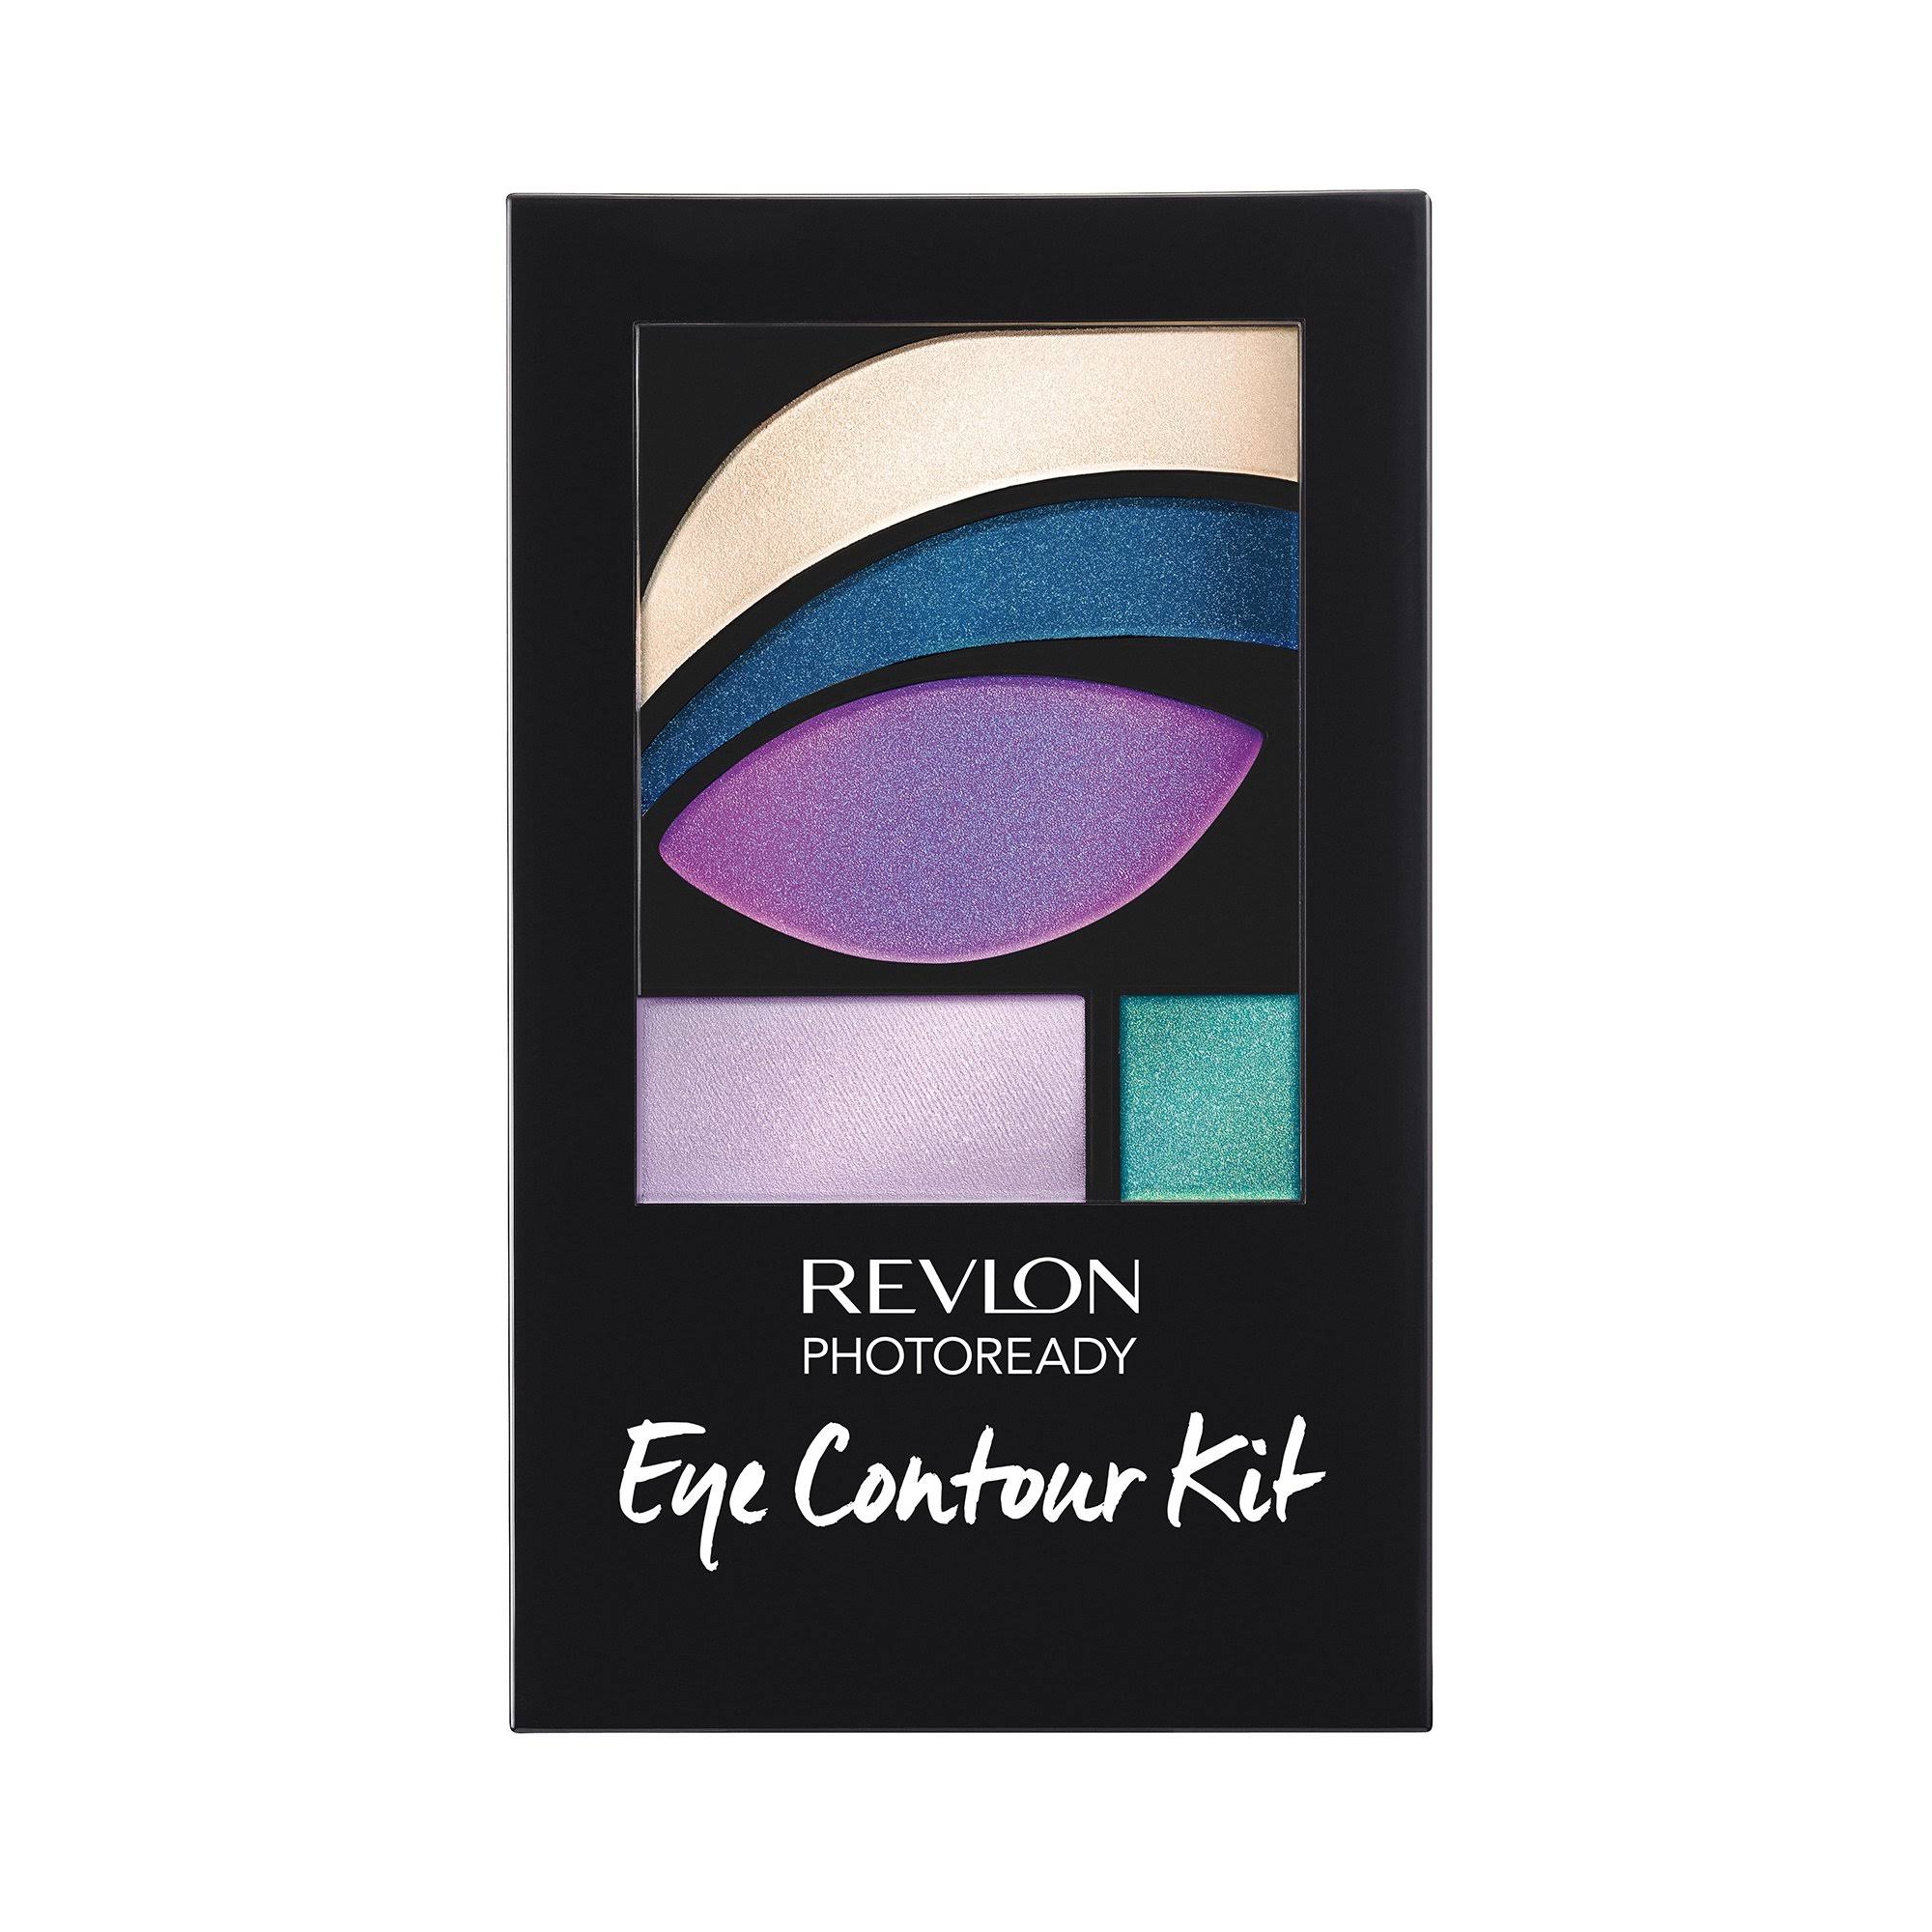 Revlon Photoready Primer and Eye Shadow Make Up - #517 Eclectic, 2.8g